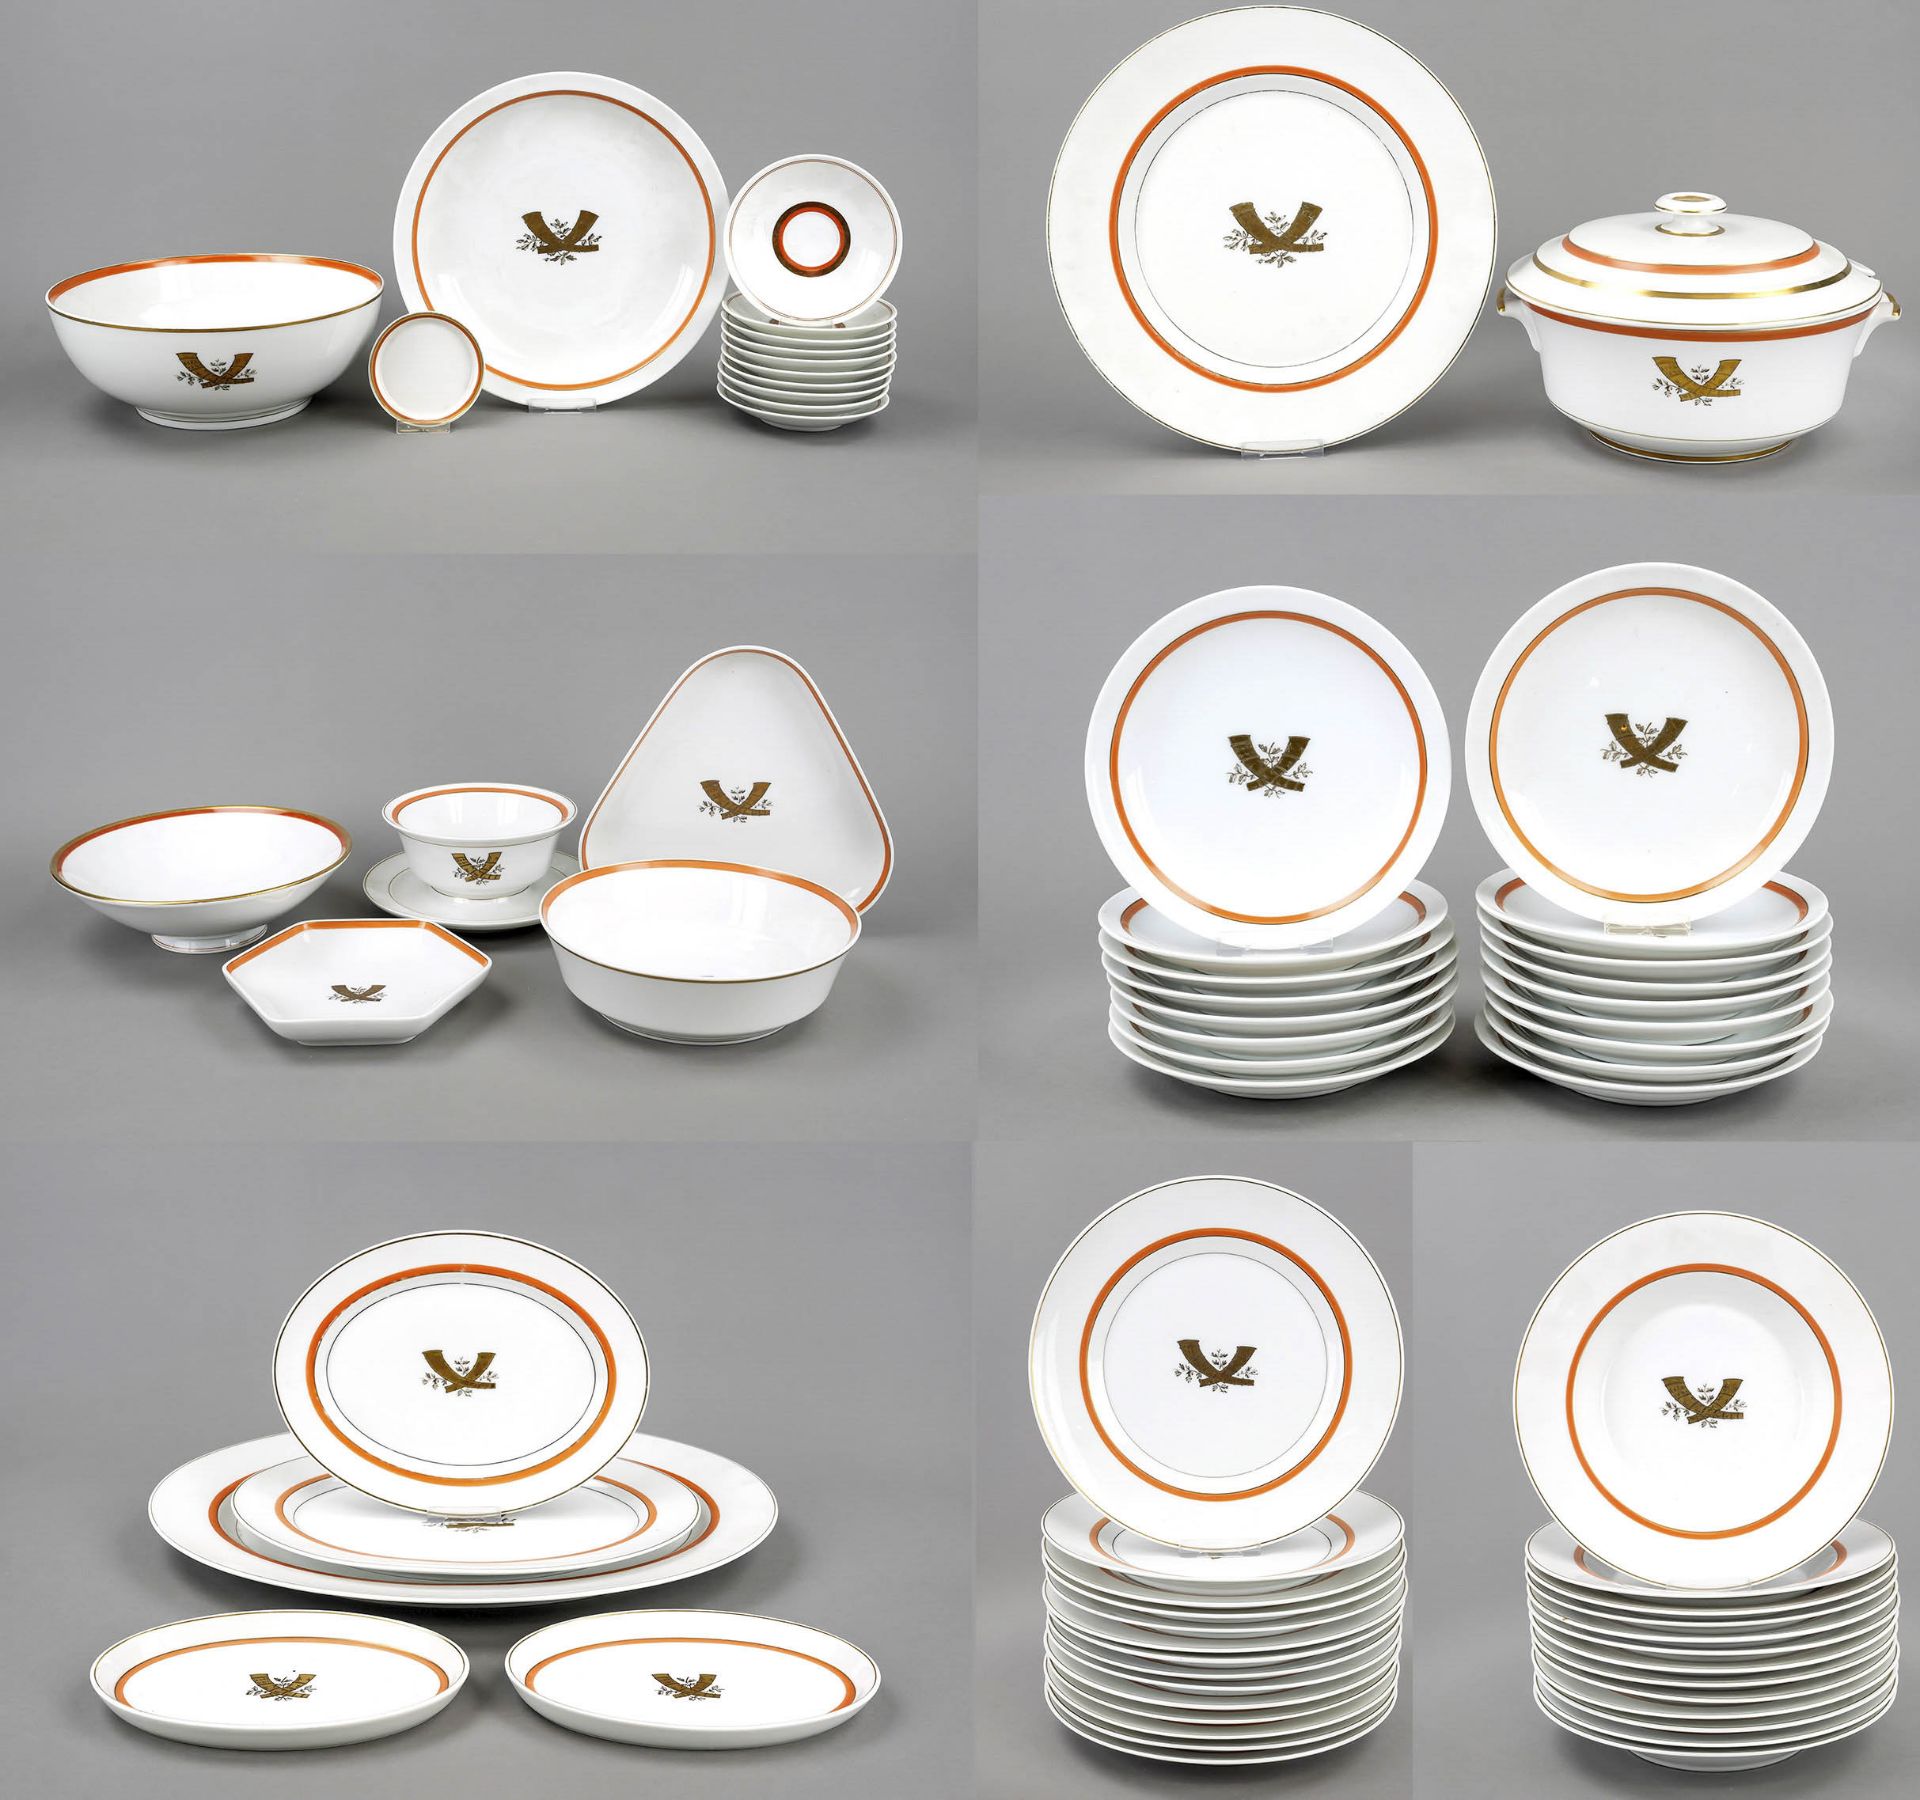 Large dinner service for 13-17 persons, 68-piece, Royal Copenhagen, Denmark, 1960s, from the